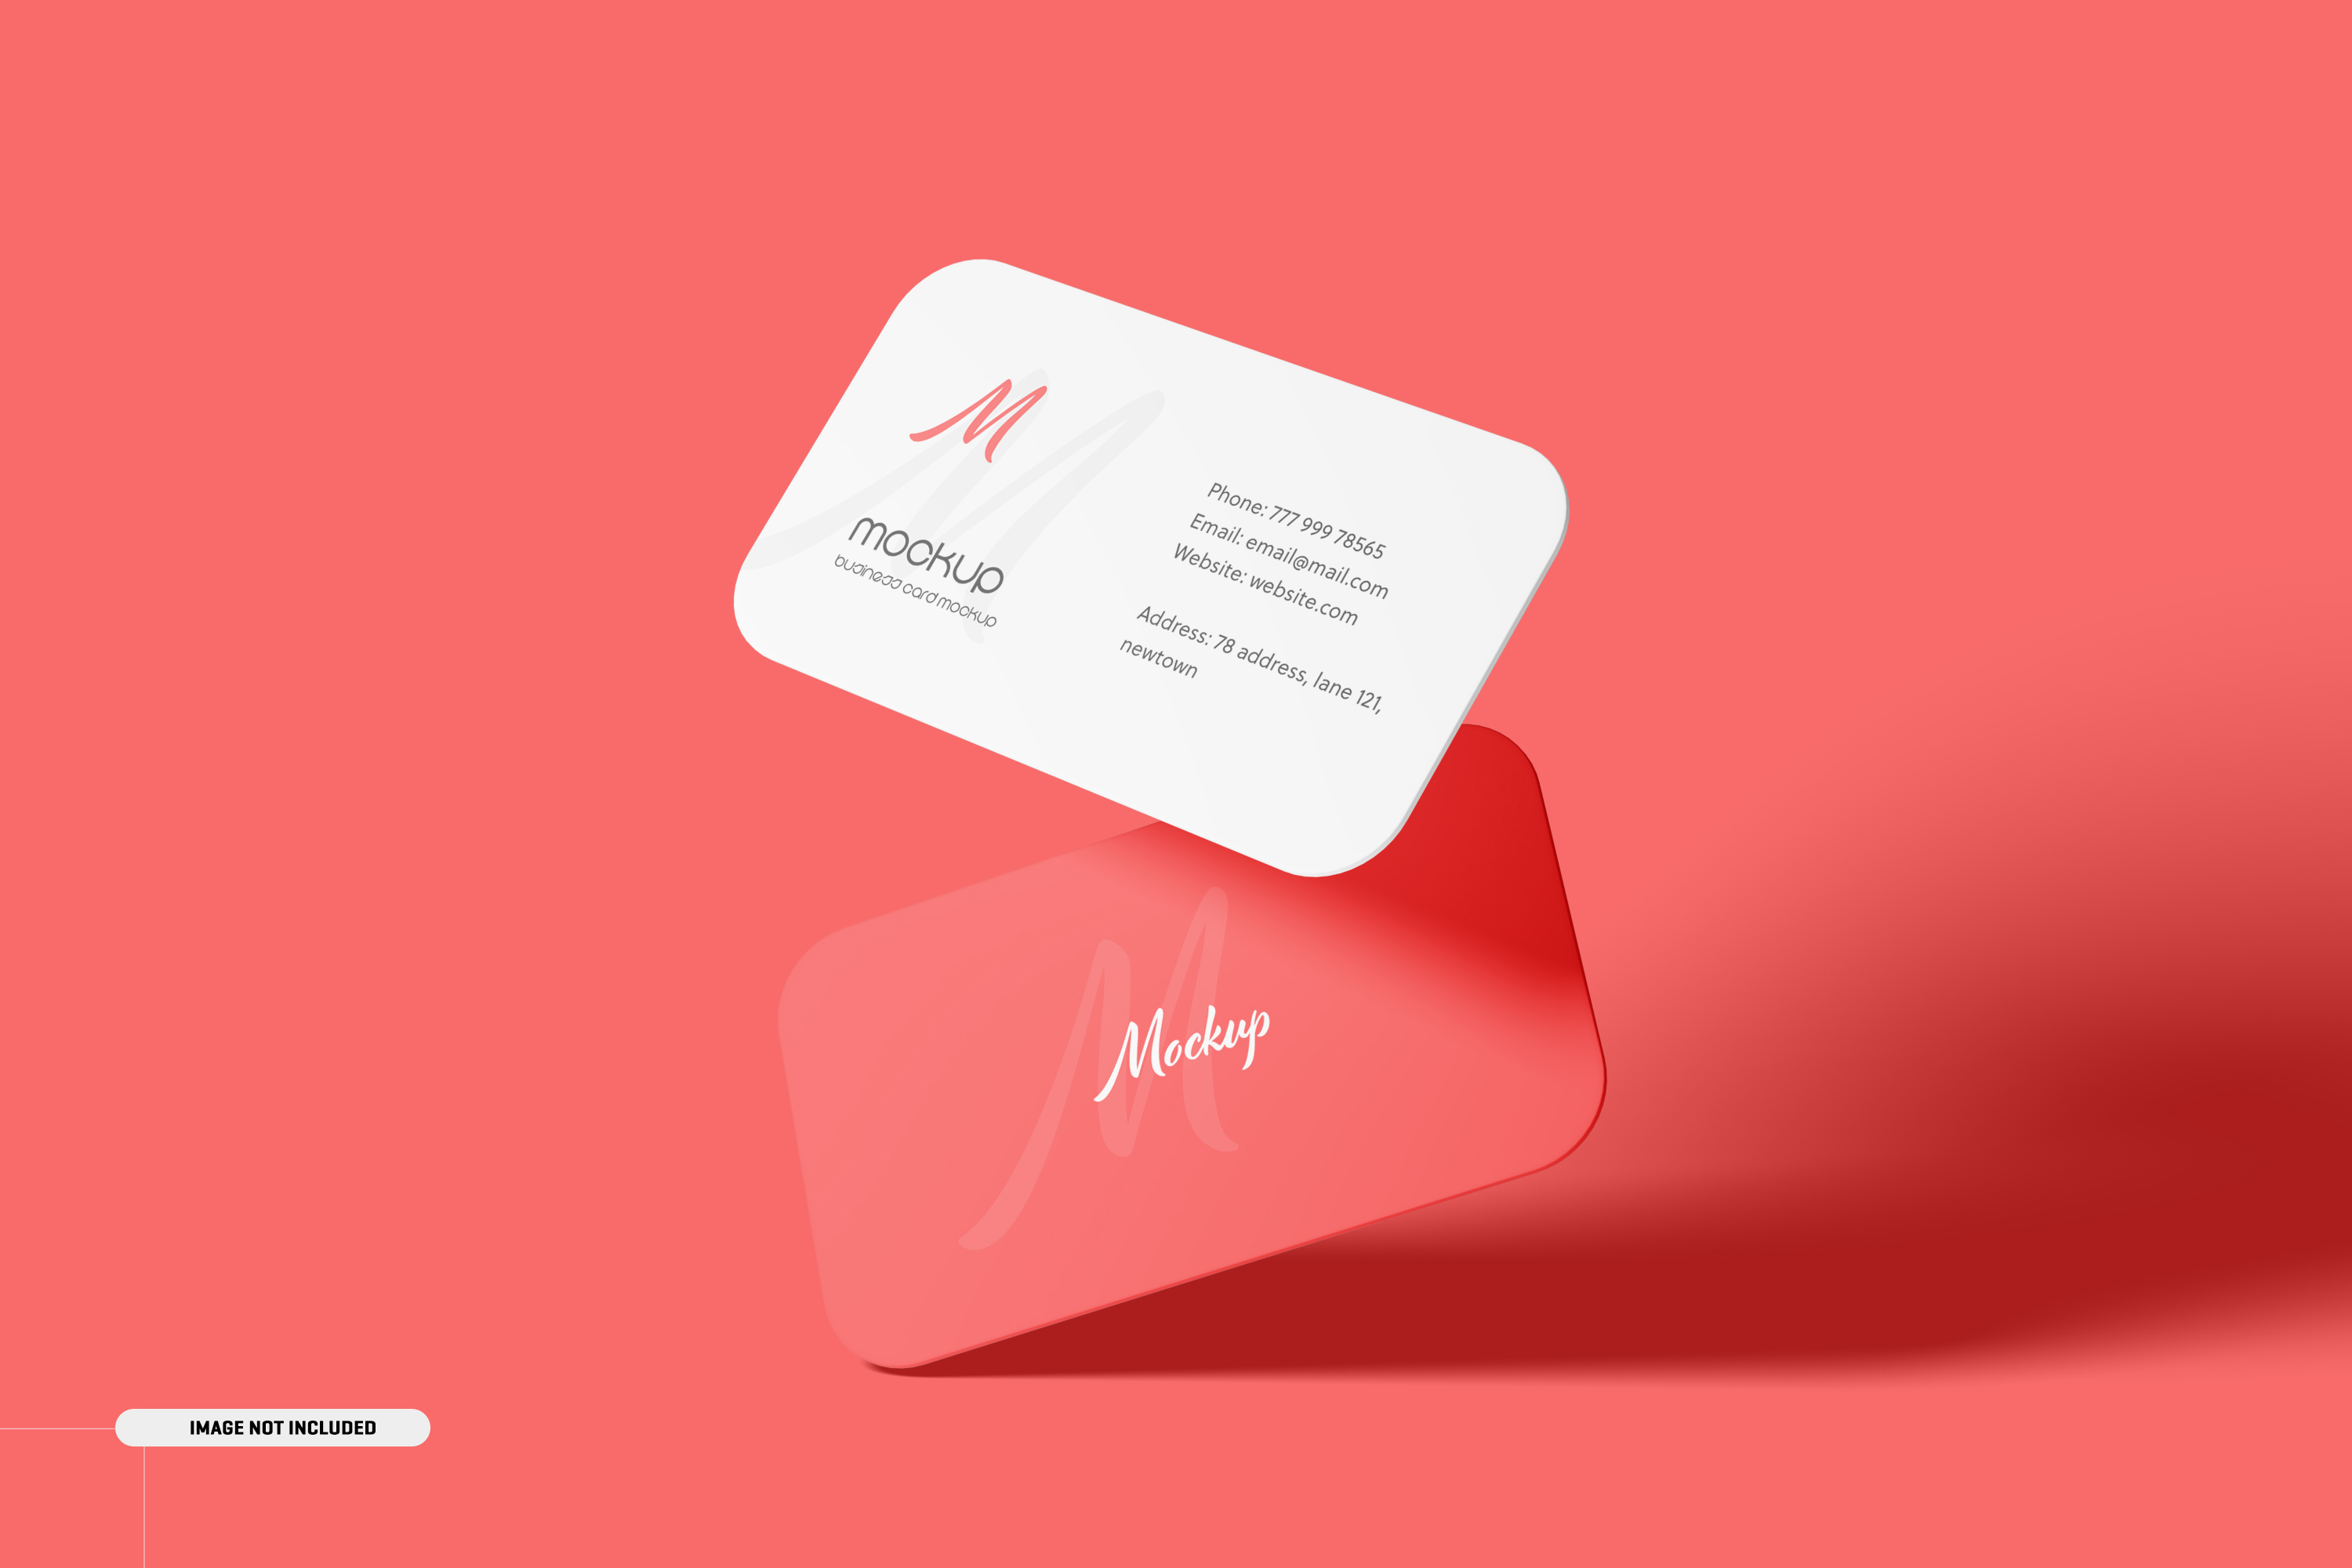 Airlines and hotels are offering discounted gift cards to allure their customers